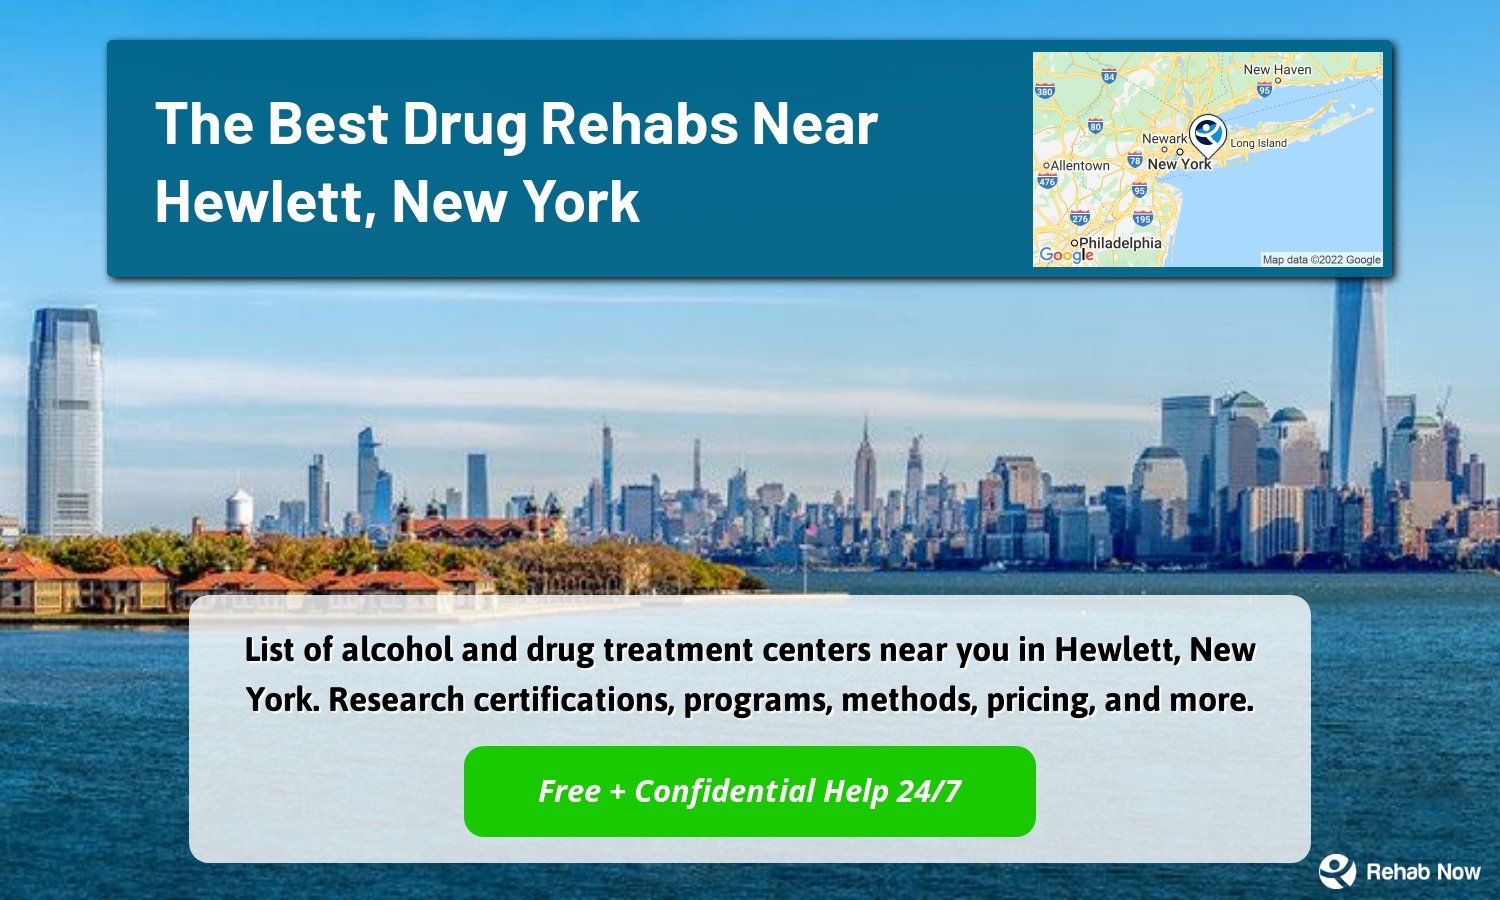 List of alcohol and drug treatment centers near you in Hewlett, New York. Research certifications, programs, methods, pricing, and more.